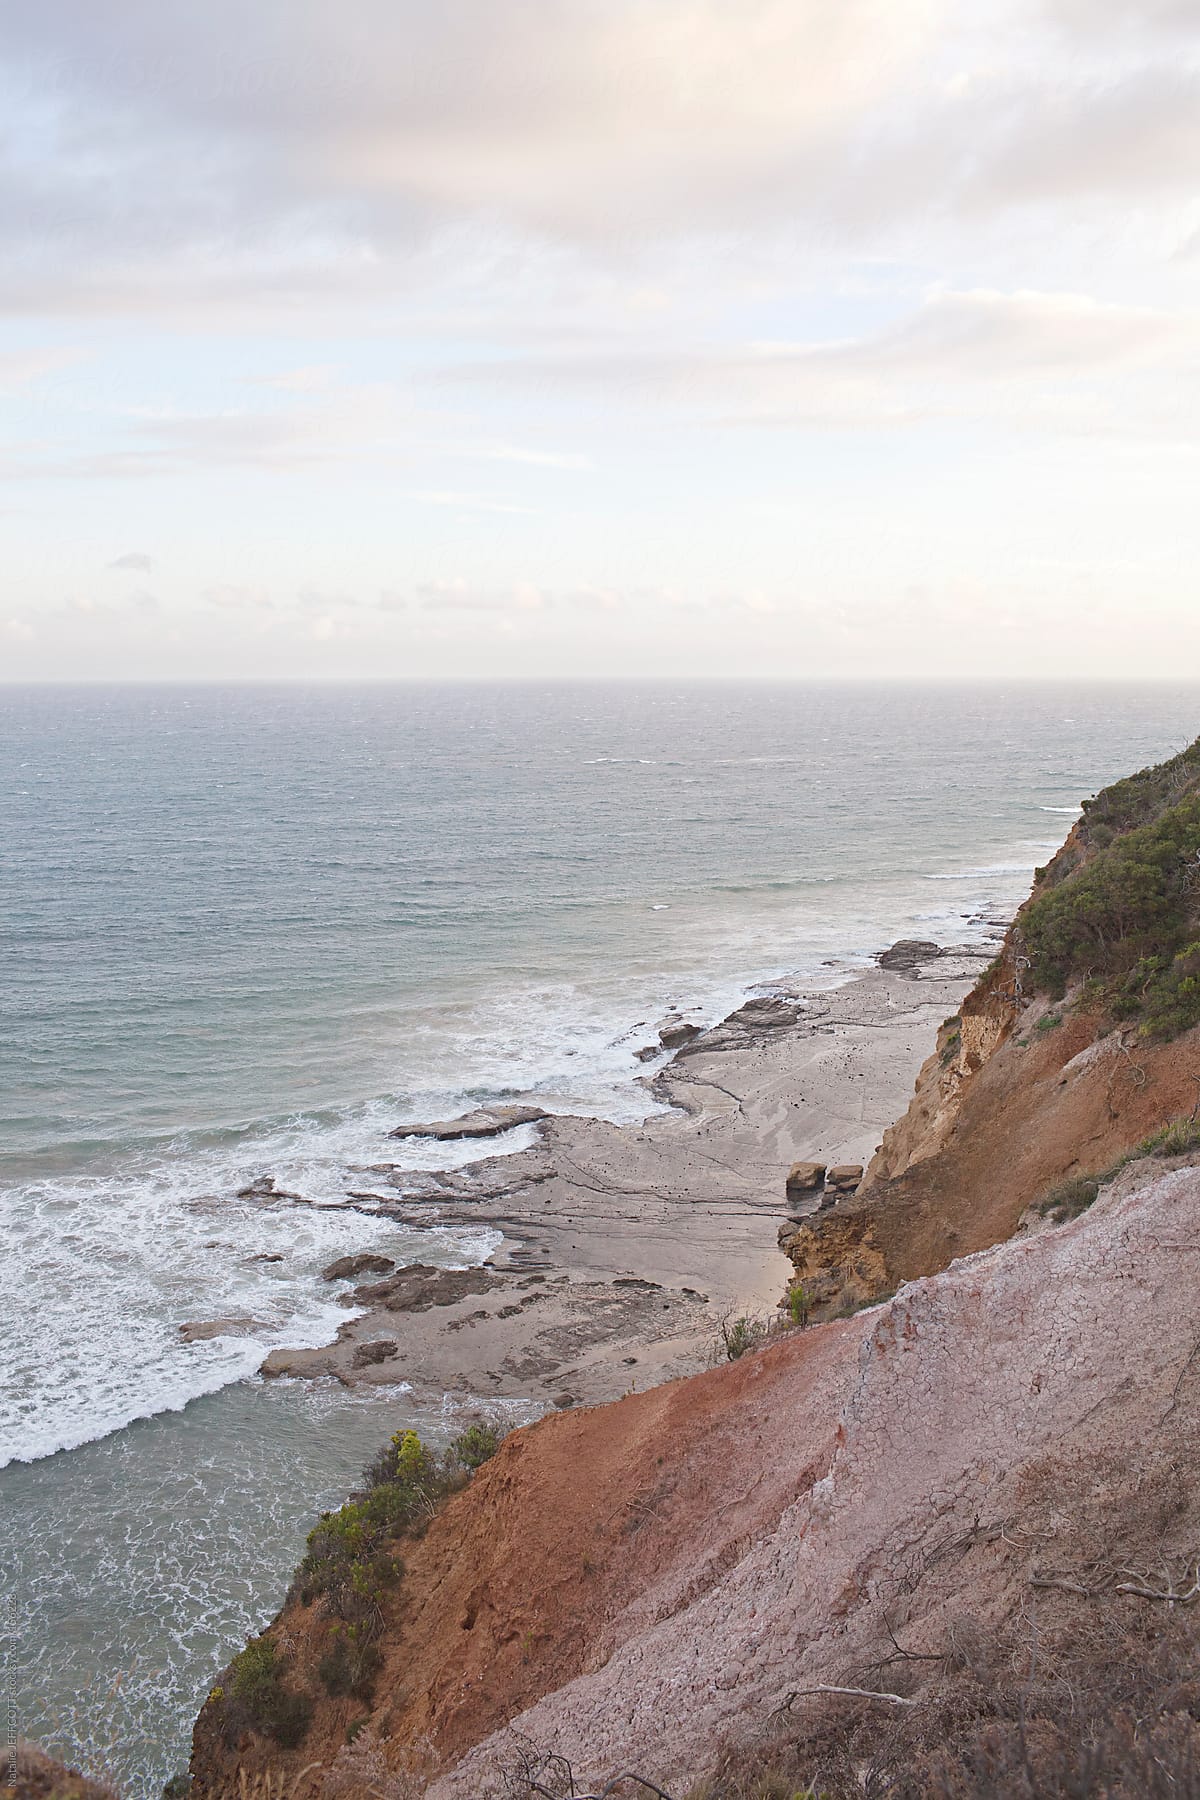 view from top of cliffs looking down at the ocean at sunset